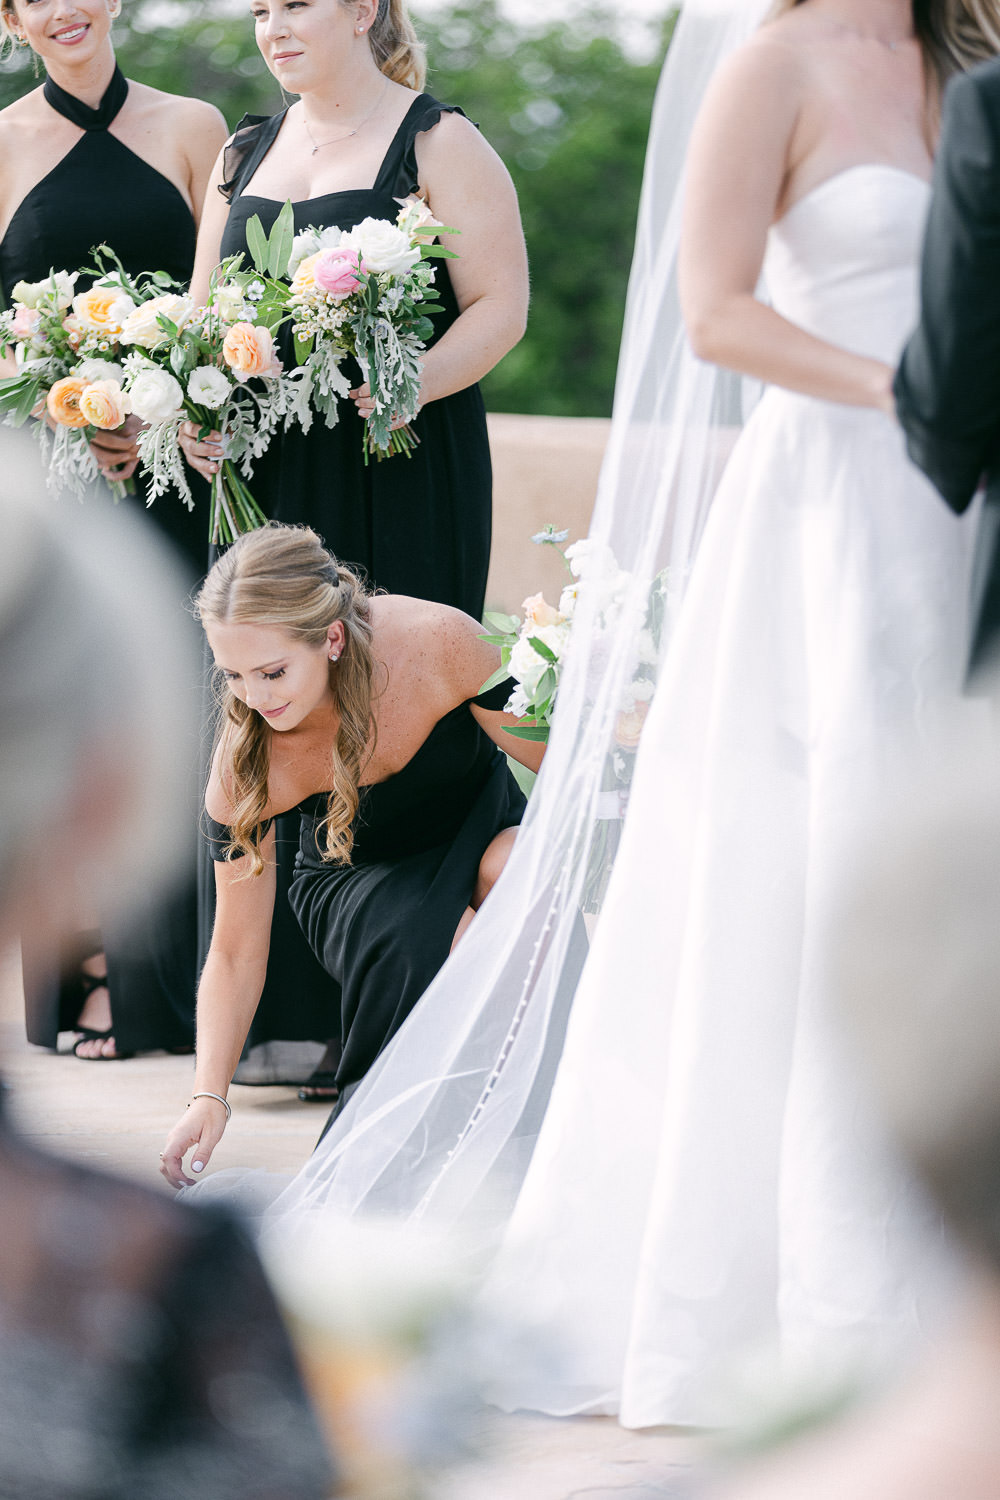 Maid of honor fixes bride's dress during wedding ceremony.